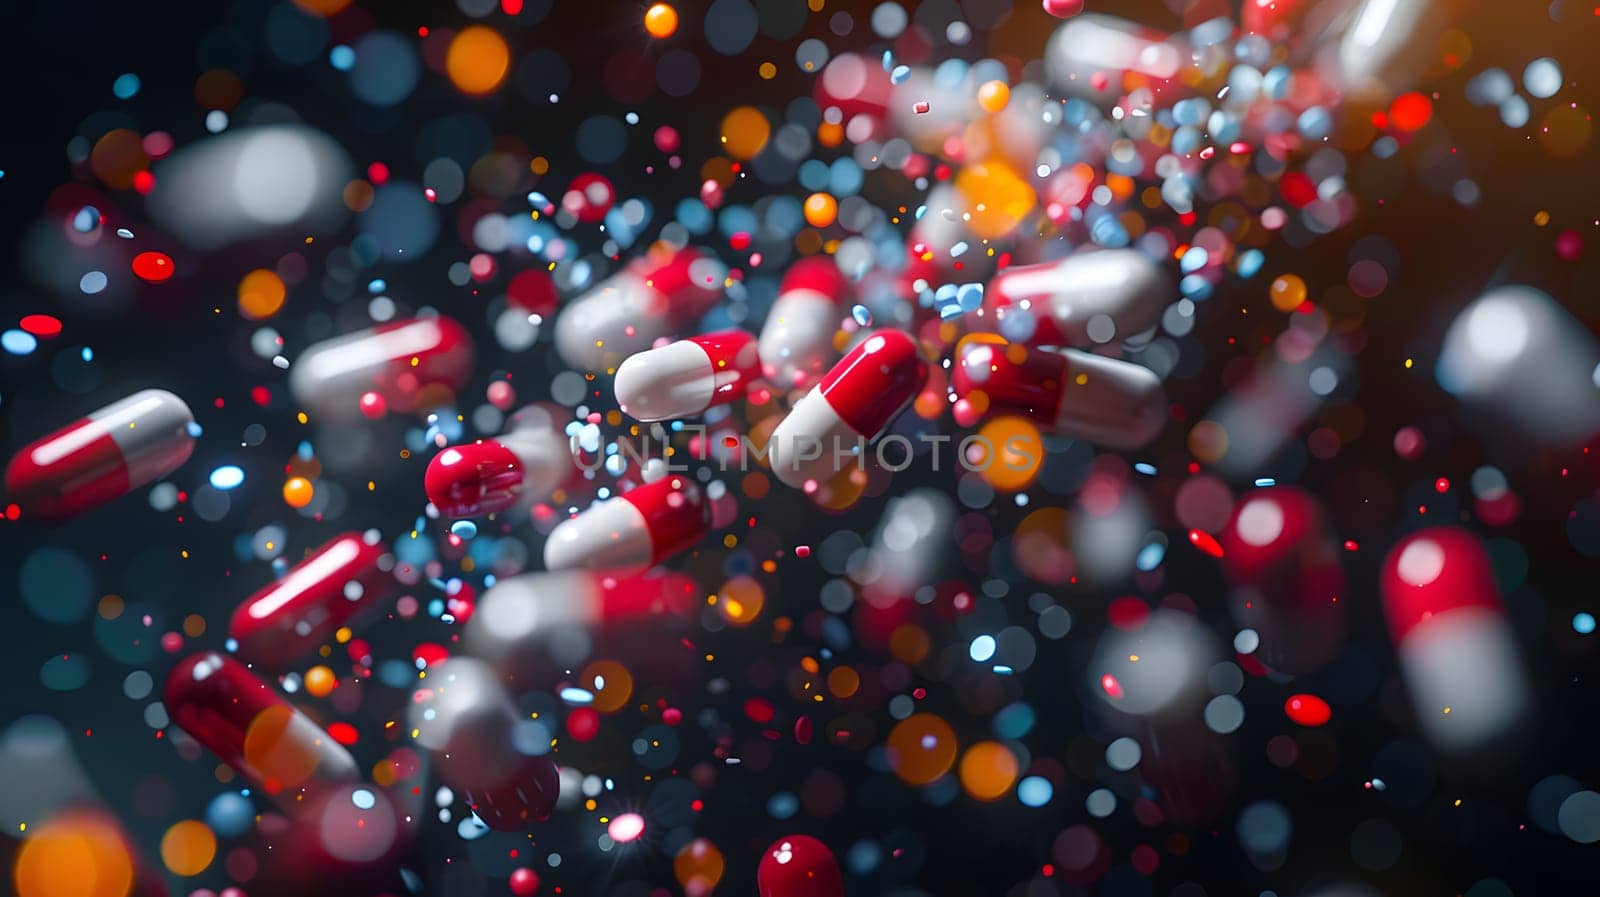 A flurry of red and white pills resembles berries on a Christmas tree amidst darkness, creating a unique holiday decoration event